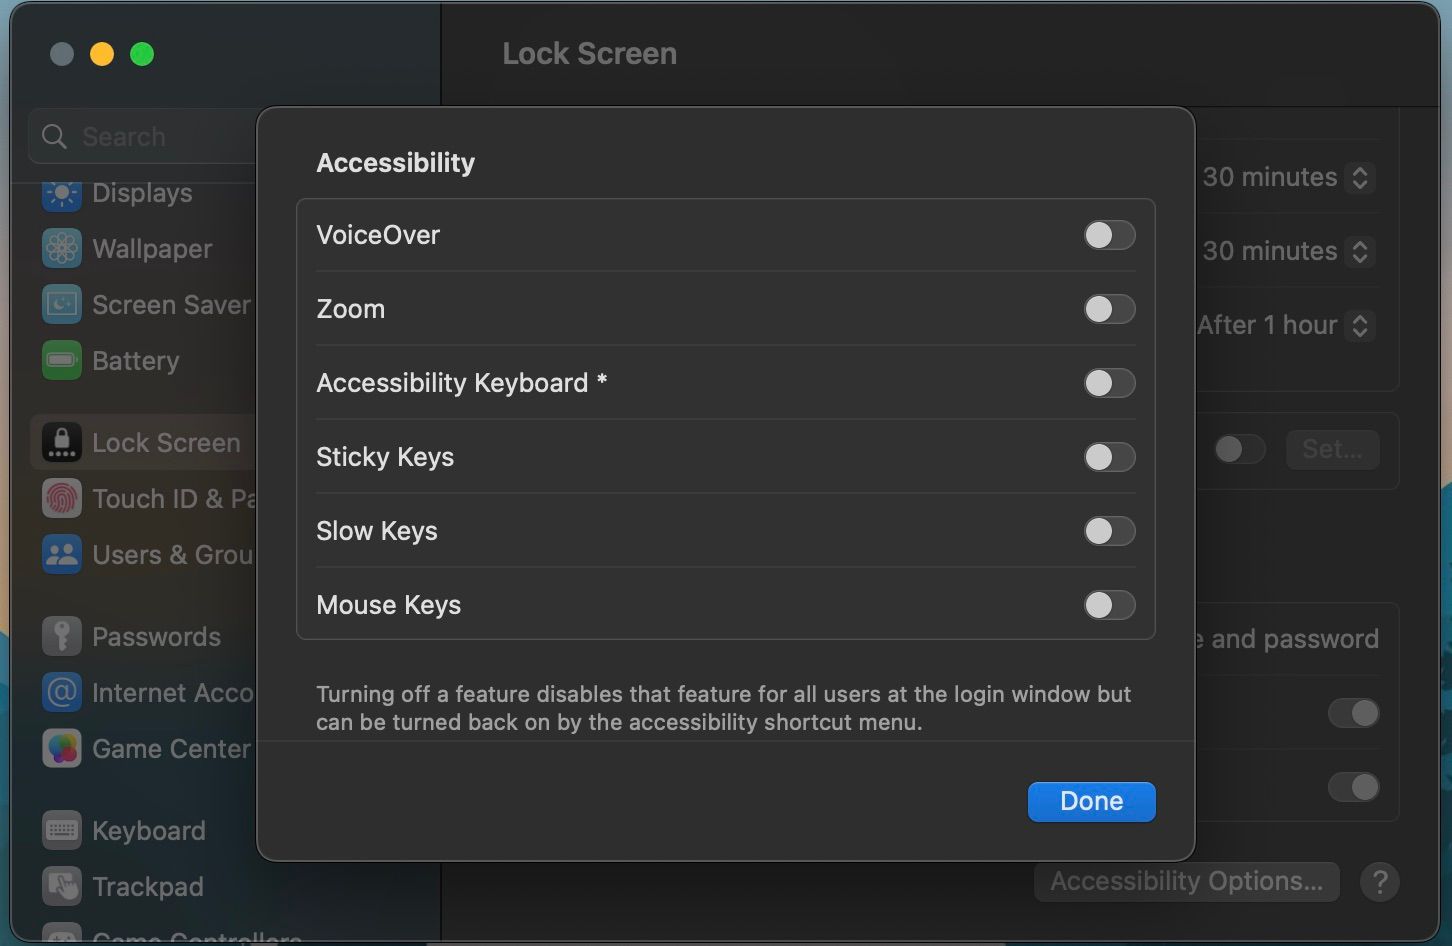 Accessibility menu in the Lock Screen panel of System Settings